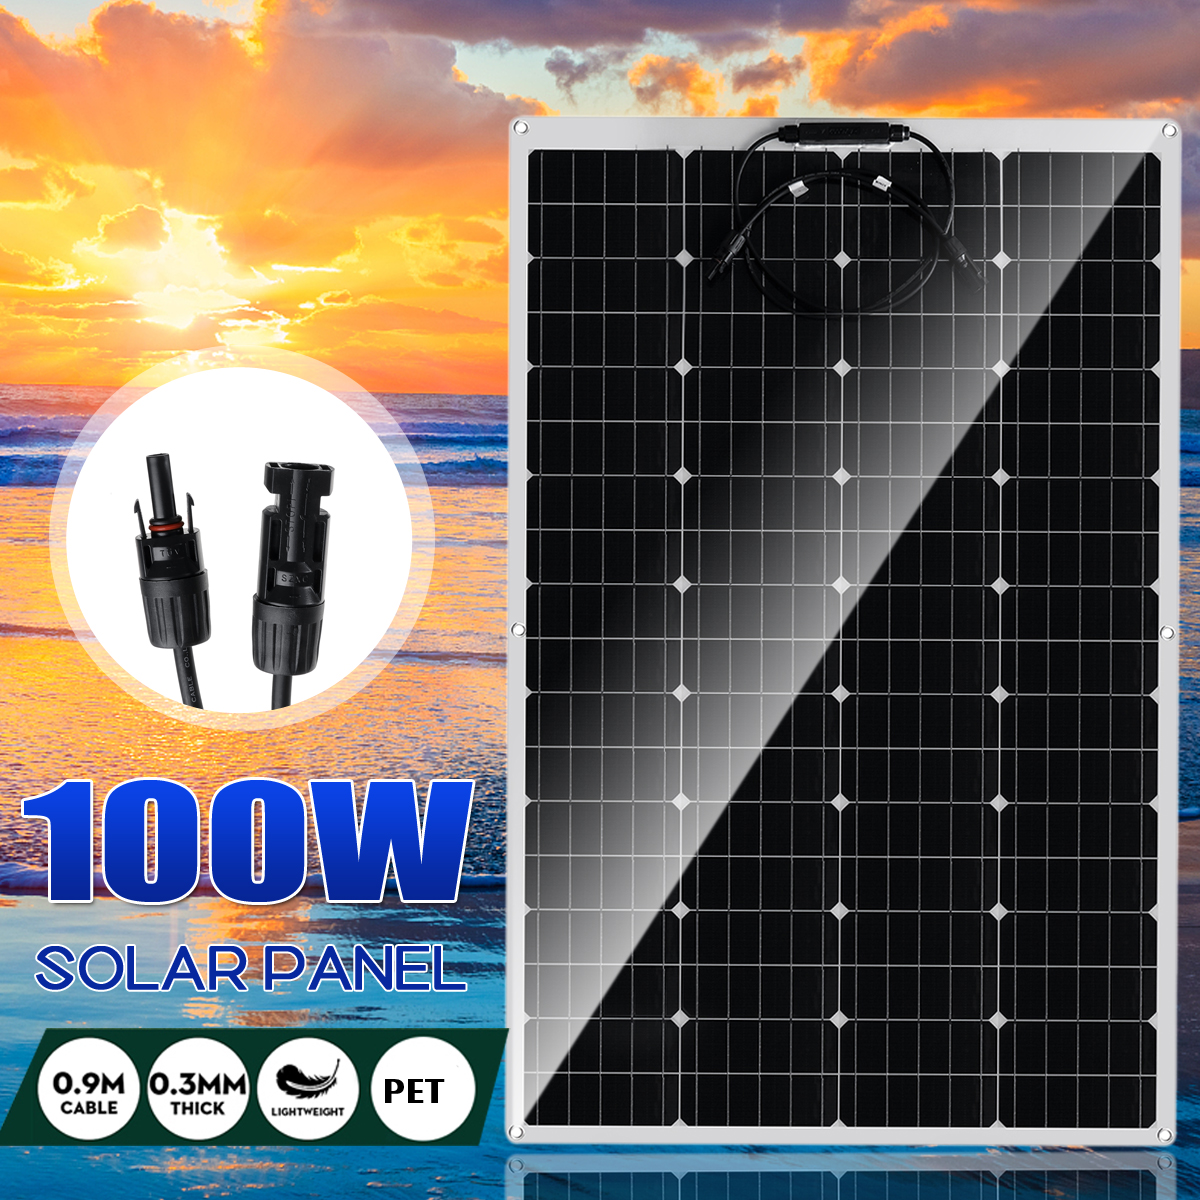 100W-18V-Flexible-Solar-Panel-Battery-Power-Charge-Kit-For-RV-Car-Boat-Camping-1717562-1